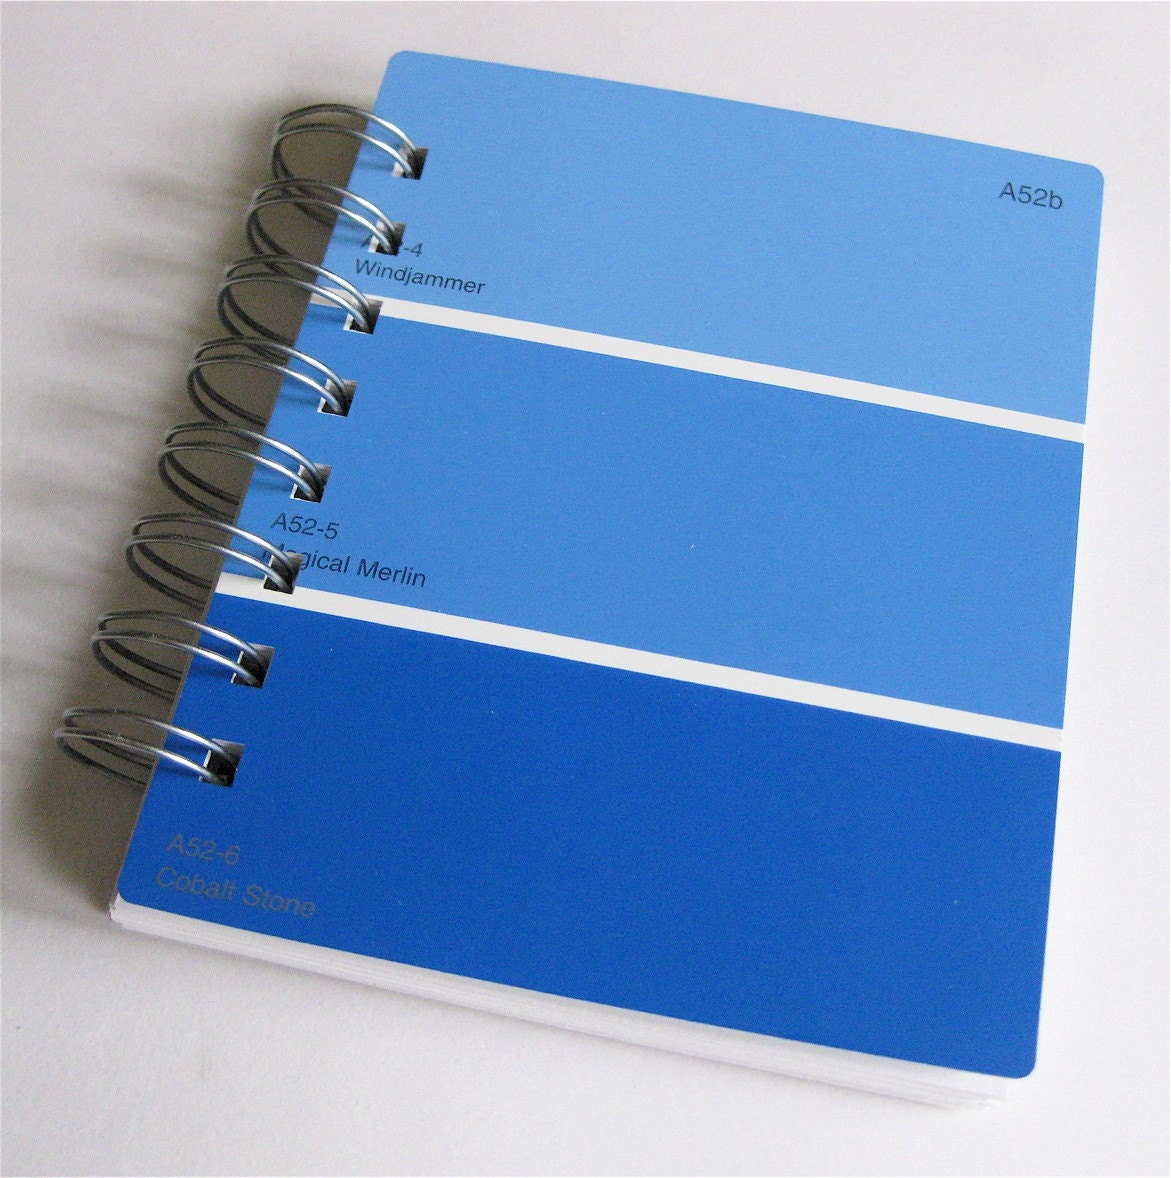 Paint Sample Notebook in Shades of Blue